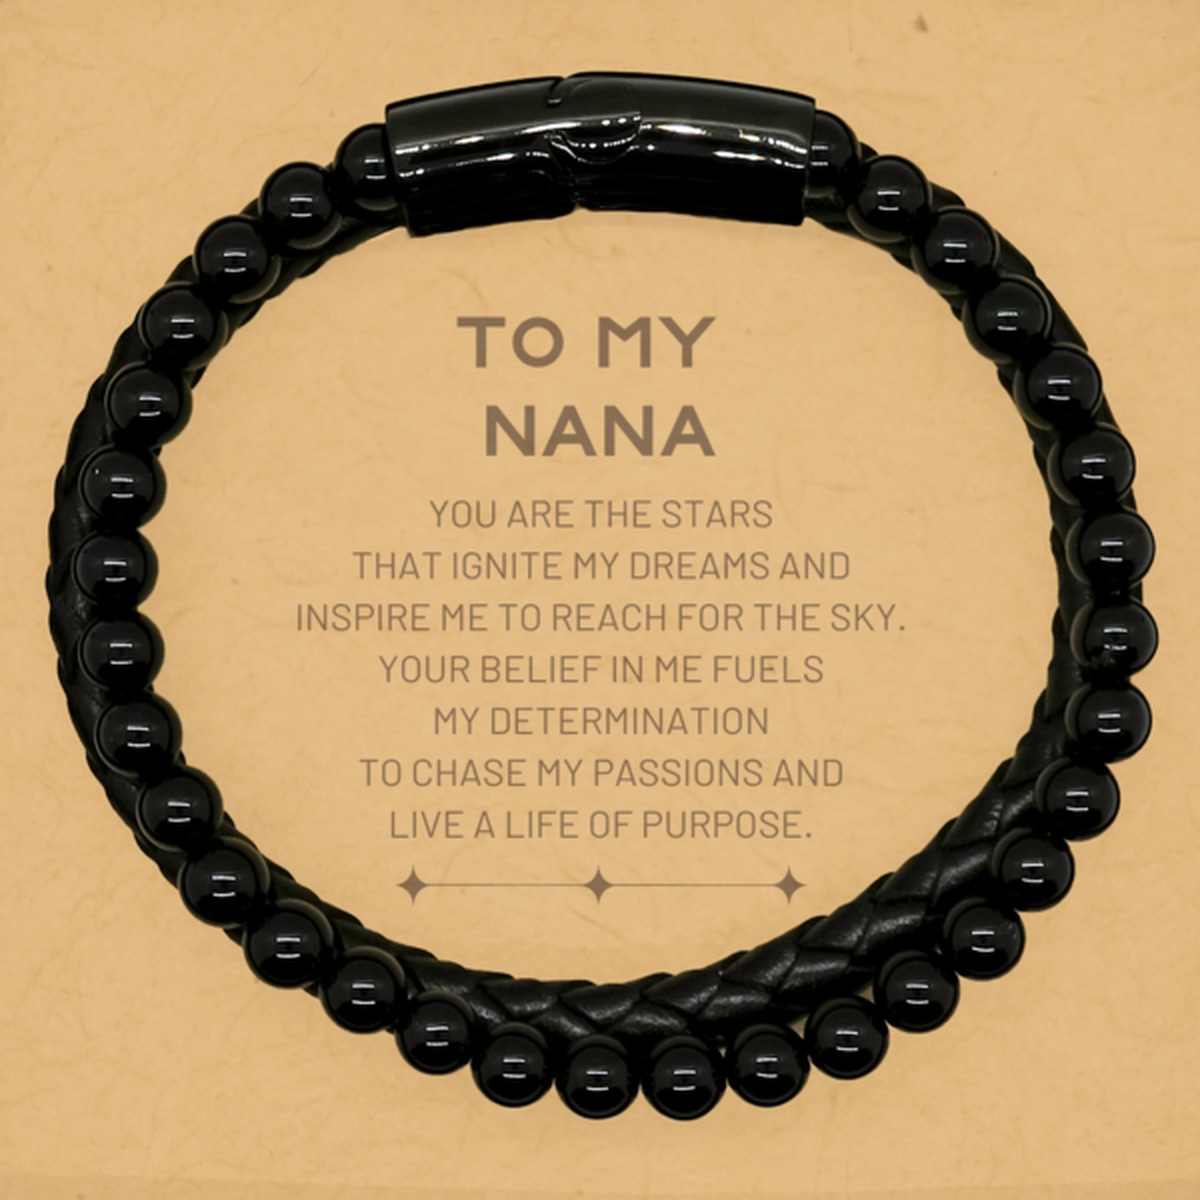 To My Nana Stone Leather Bracelets, You are the stars that ignite my dreams and inspire me to reach for the sky, Birthday Unique Gifts For Nana, Thank You Gifts For Nana